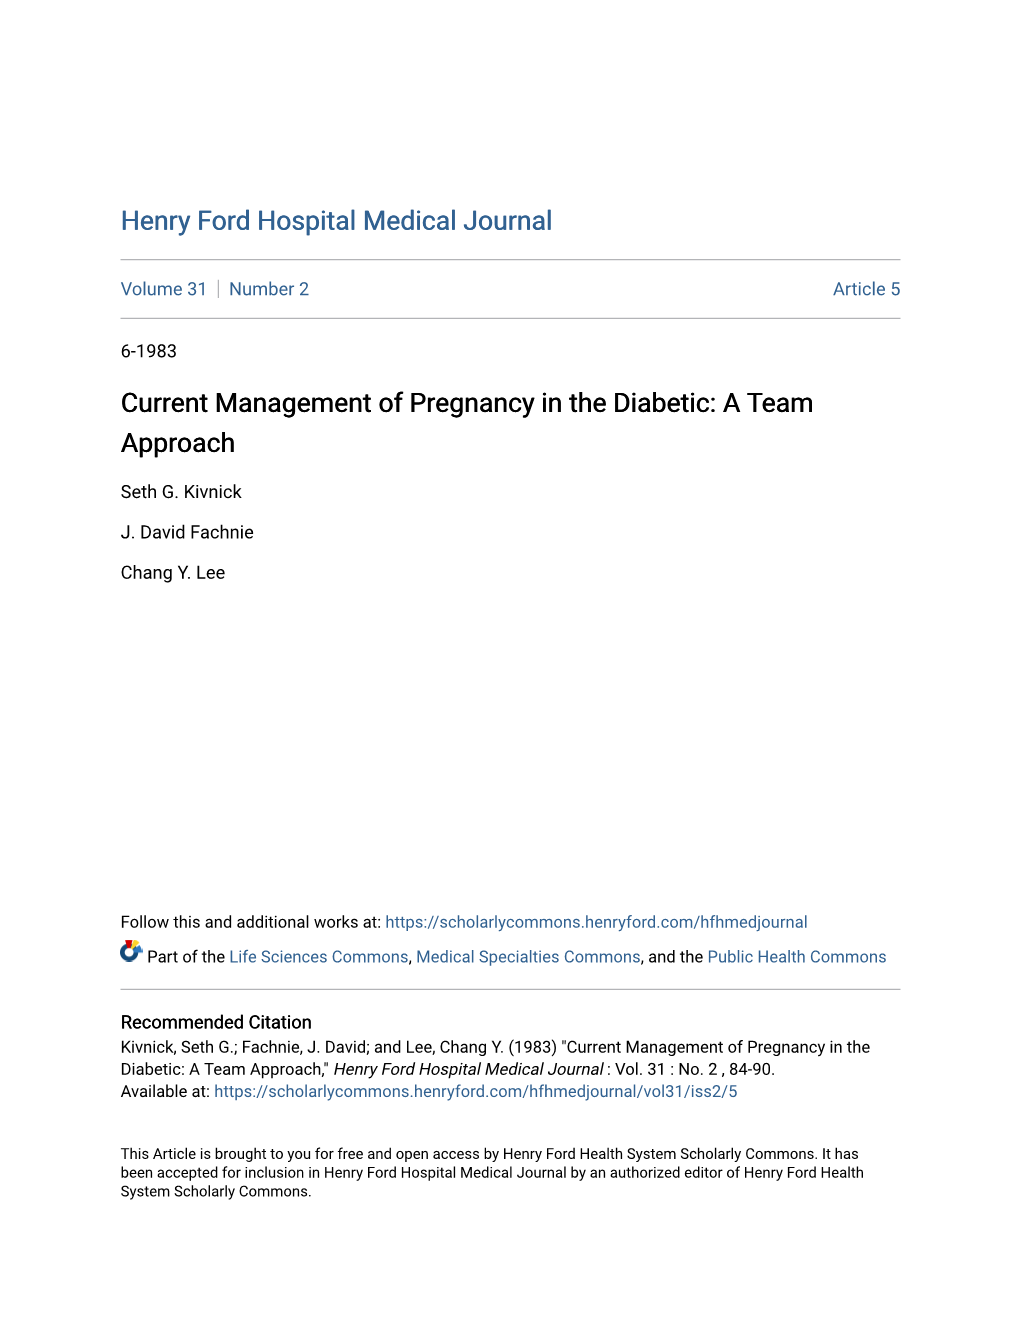 Current Management of Pregnancy in the Diabetic: a Team Approach